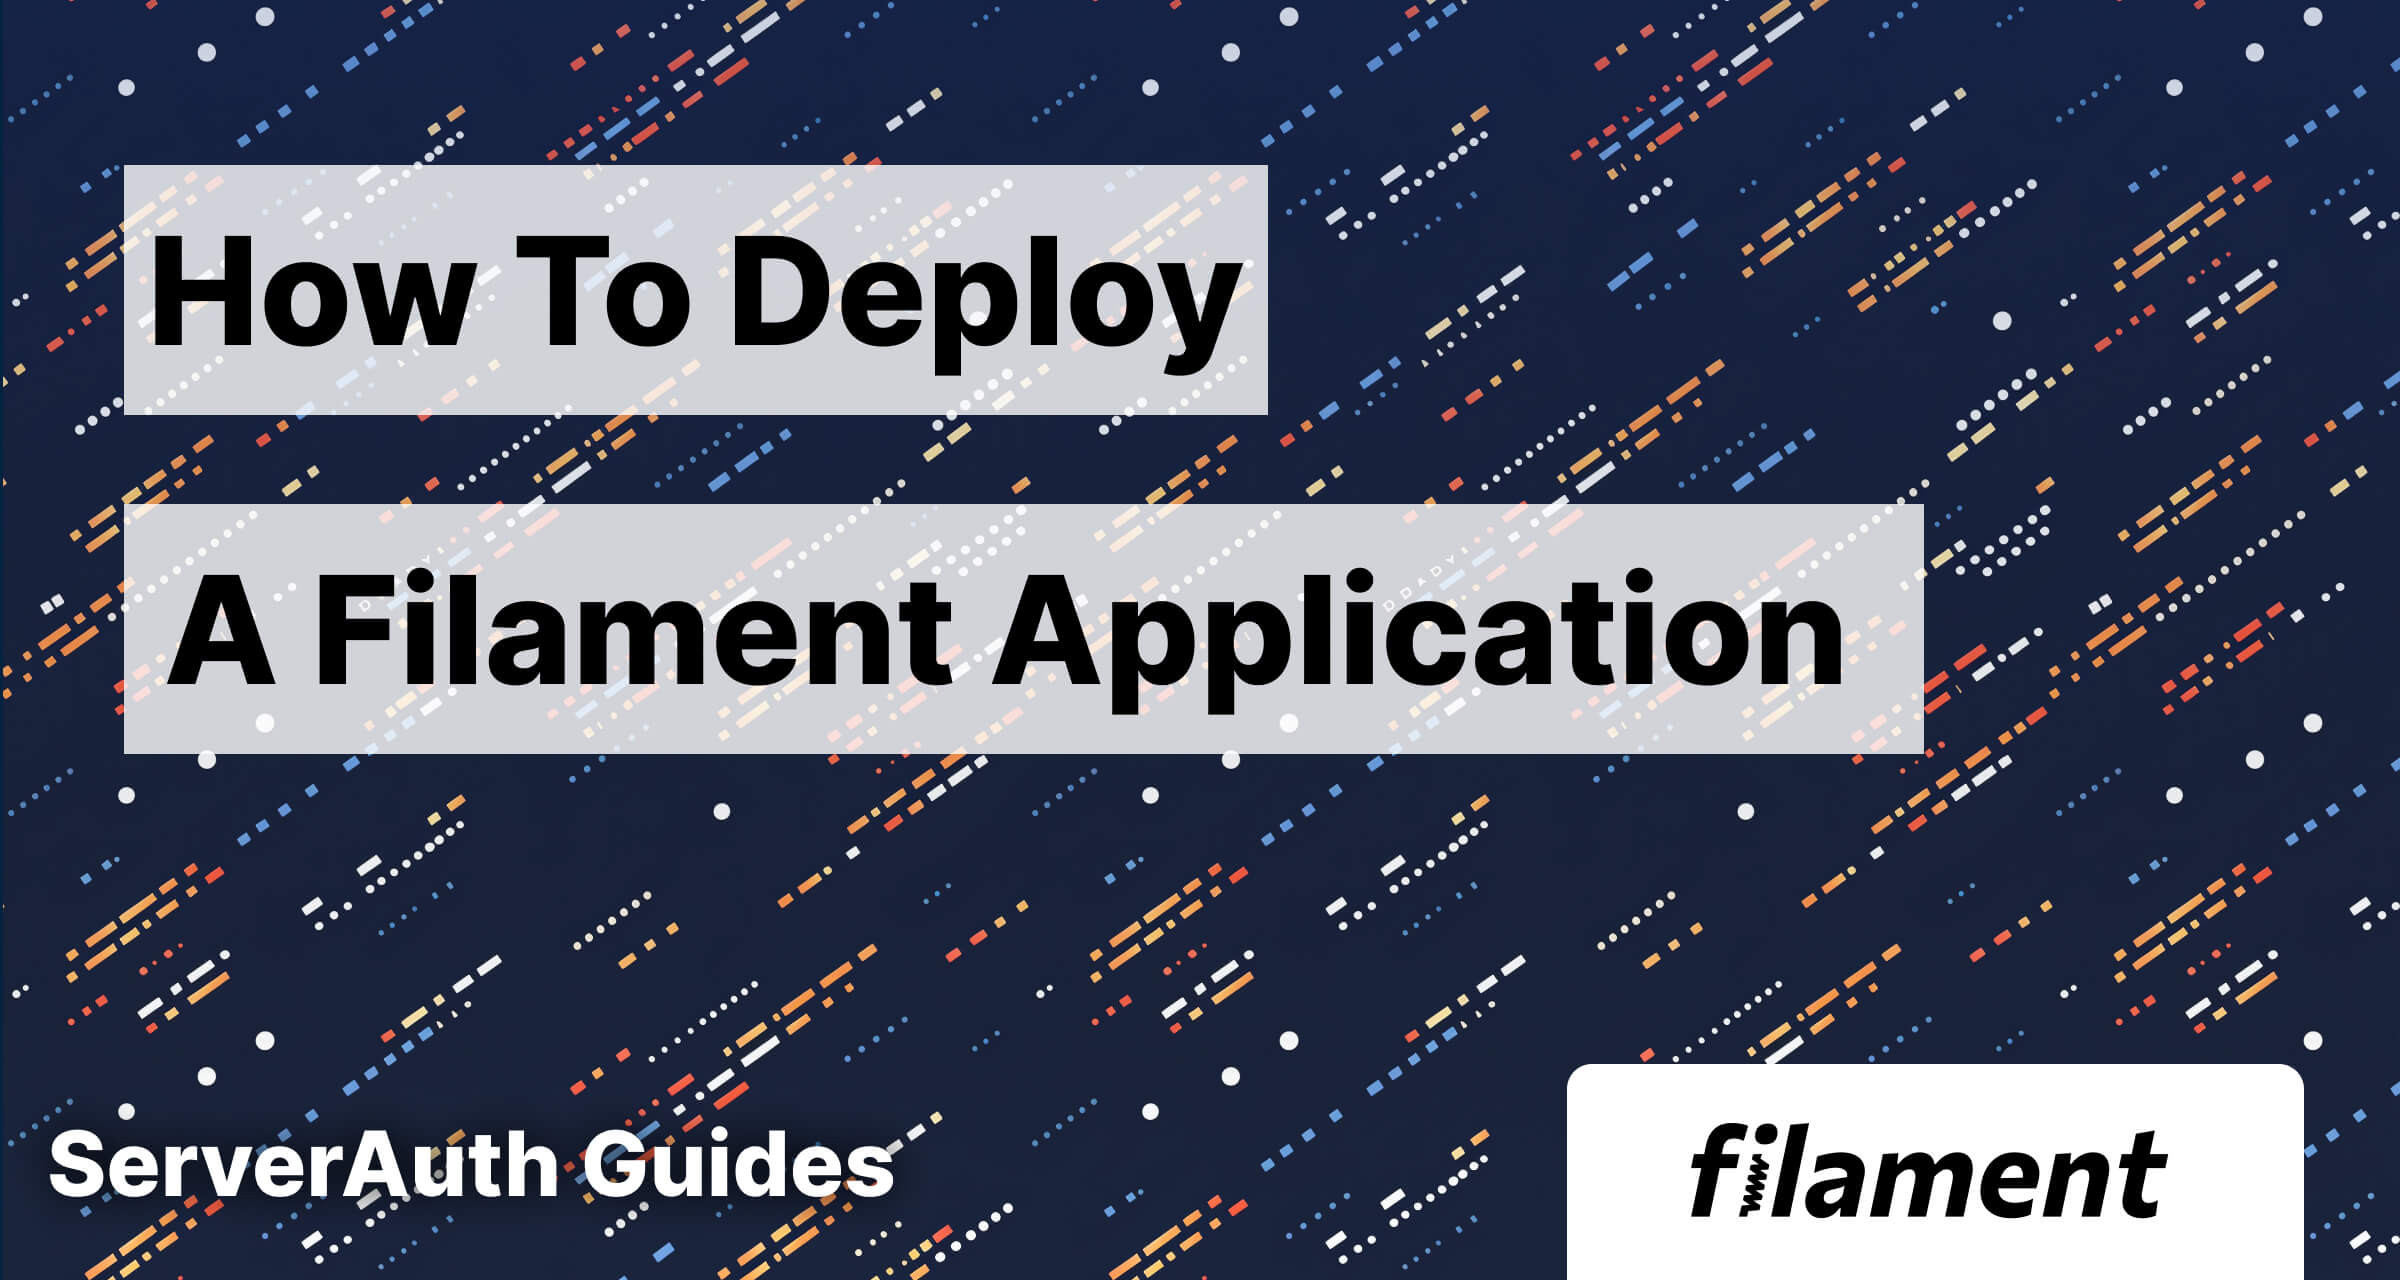 How to deploy a filament application